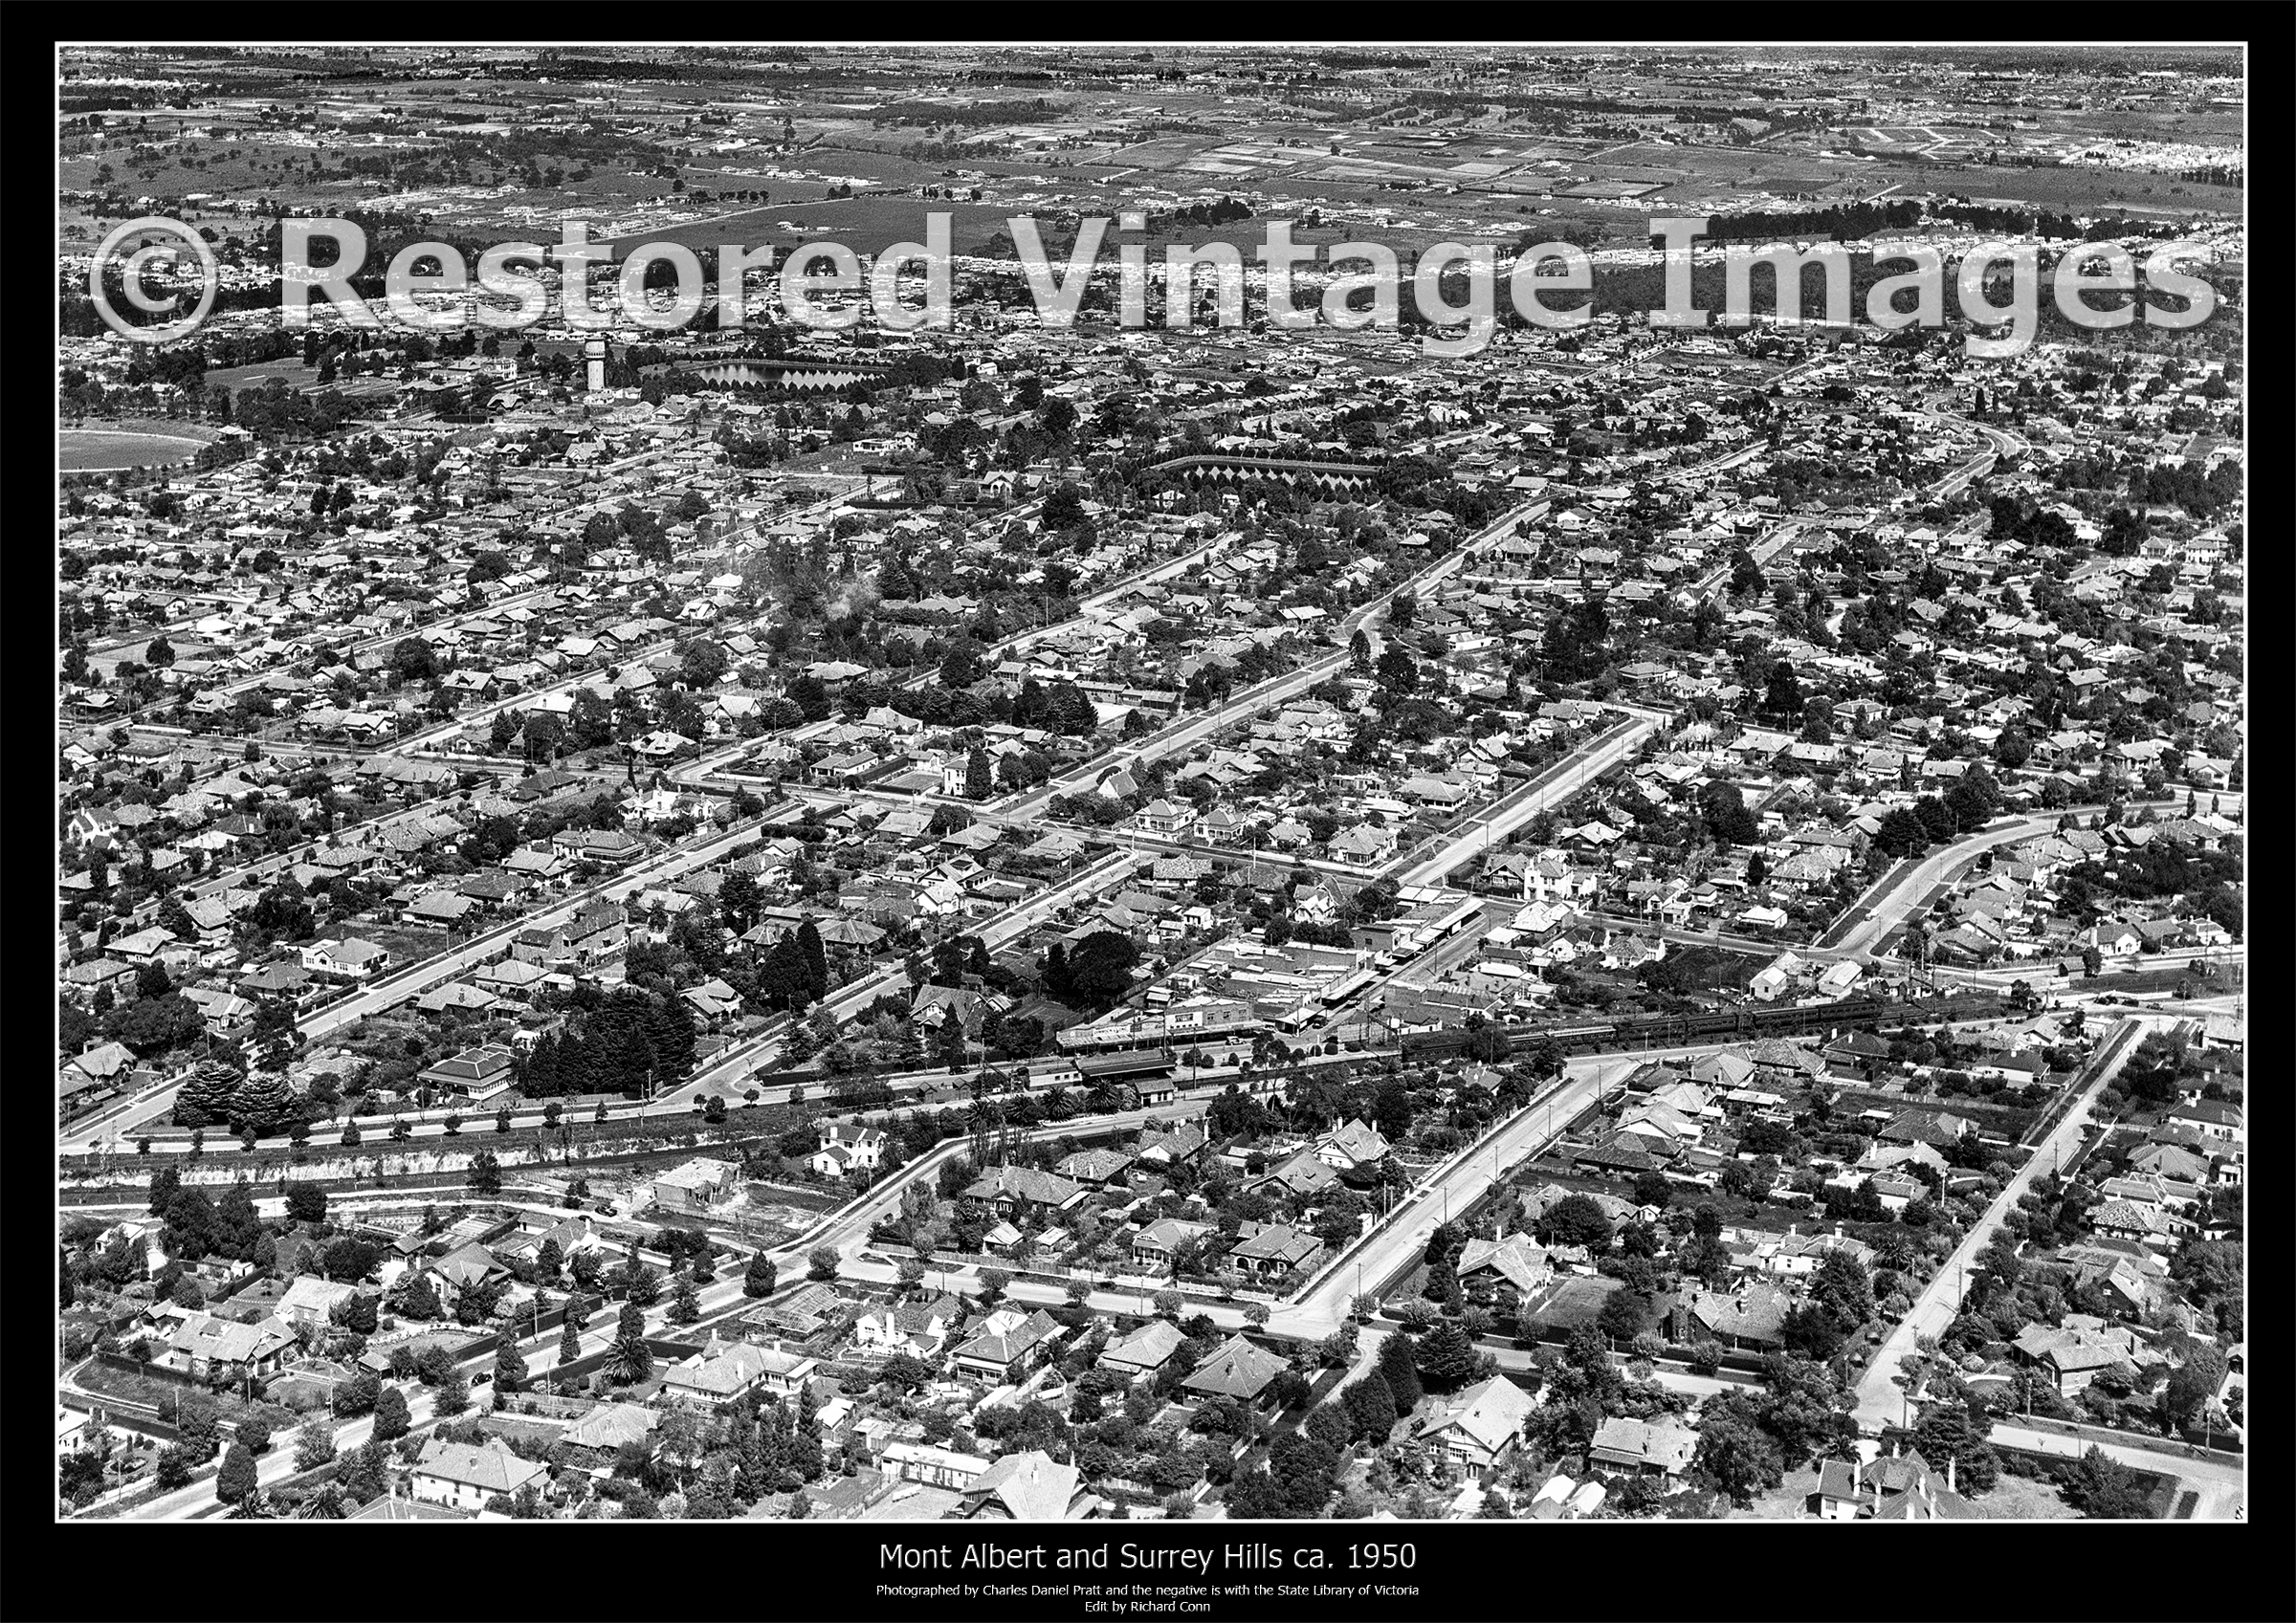 Mont Albert And Surrey Hills Looking South East From Over Whitehorse Road Ca. 1950